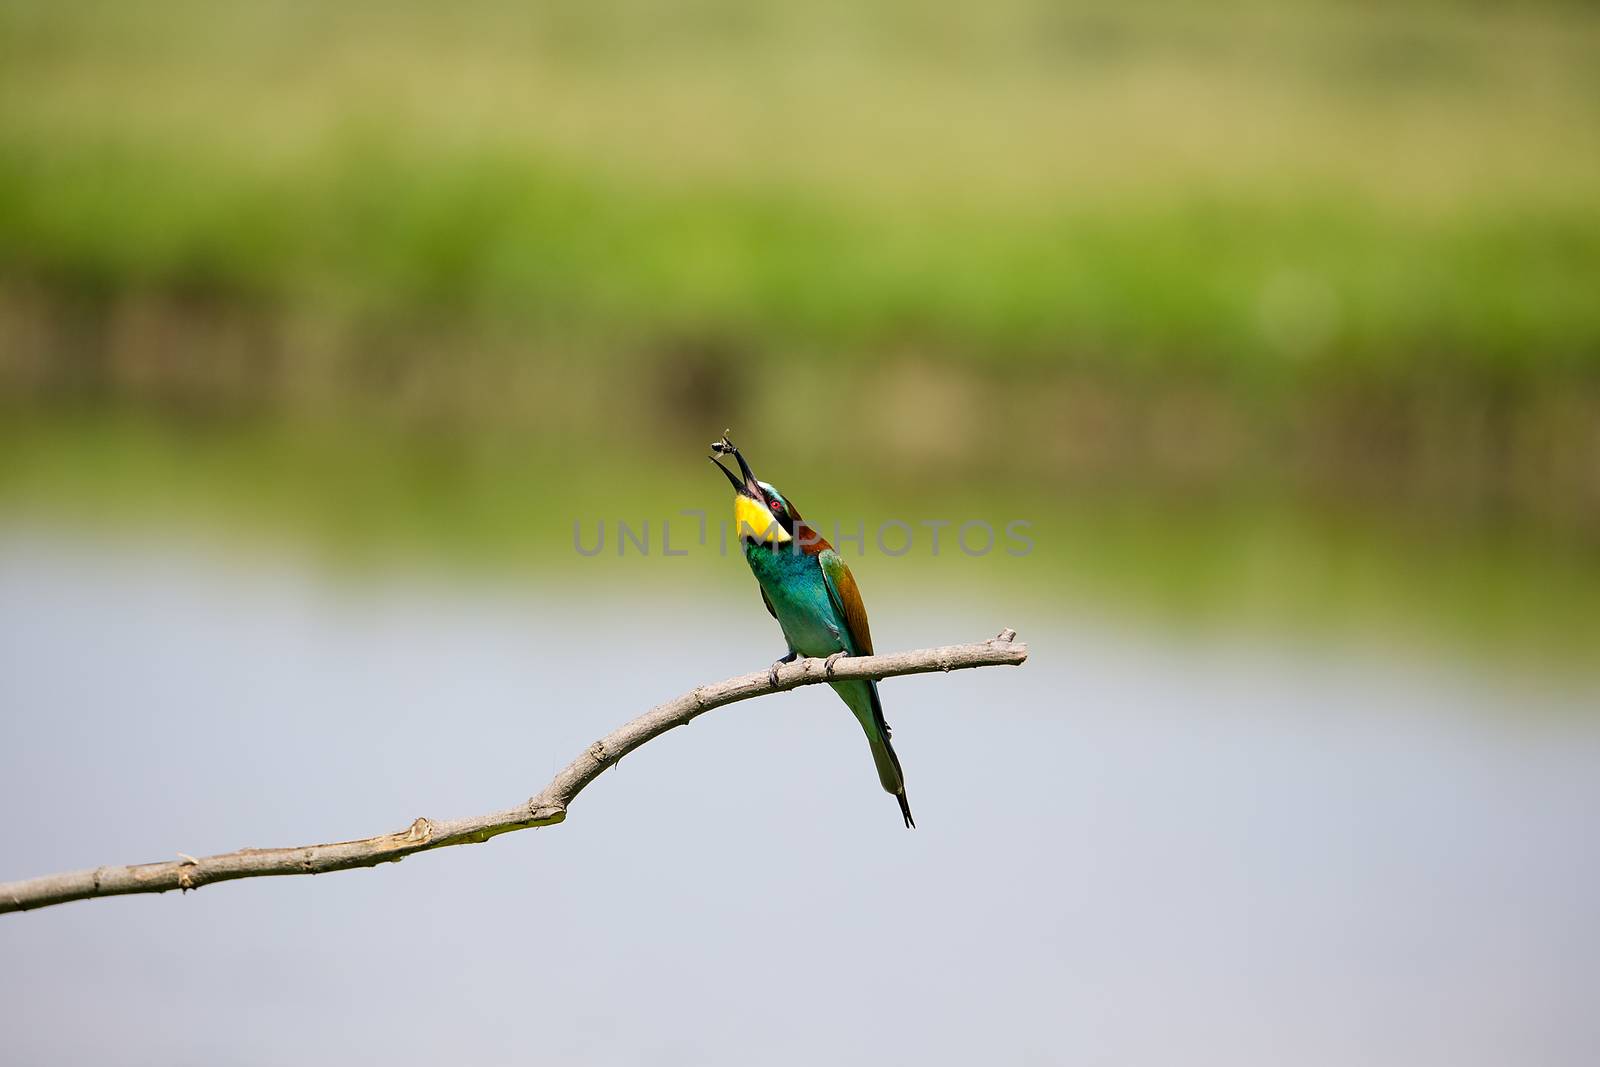 European Bee-eater playing with insect (Merops apiaster) on brunch by Tanja_g